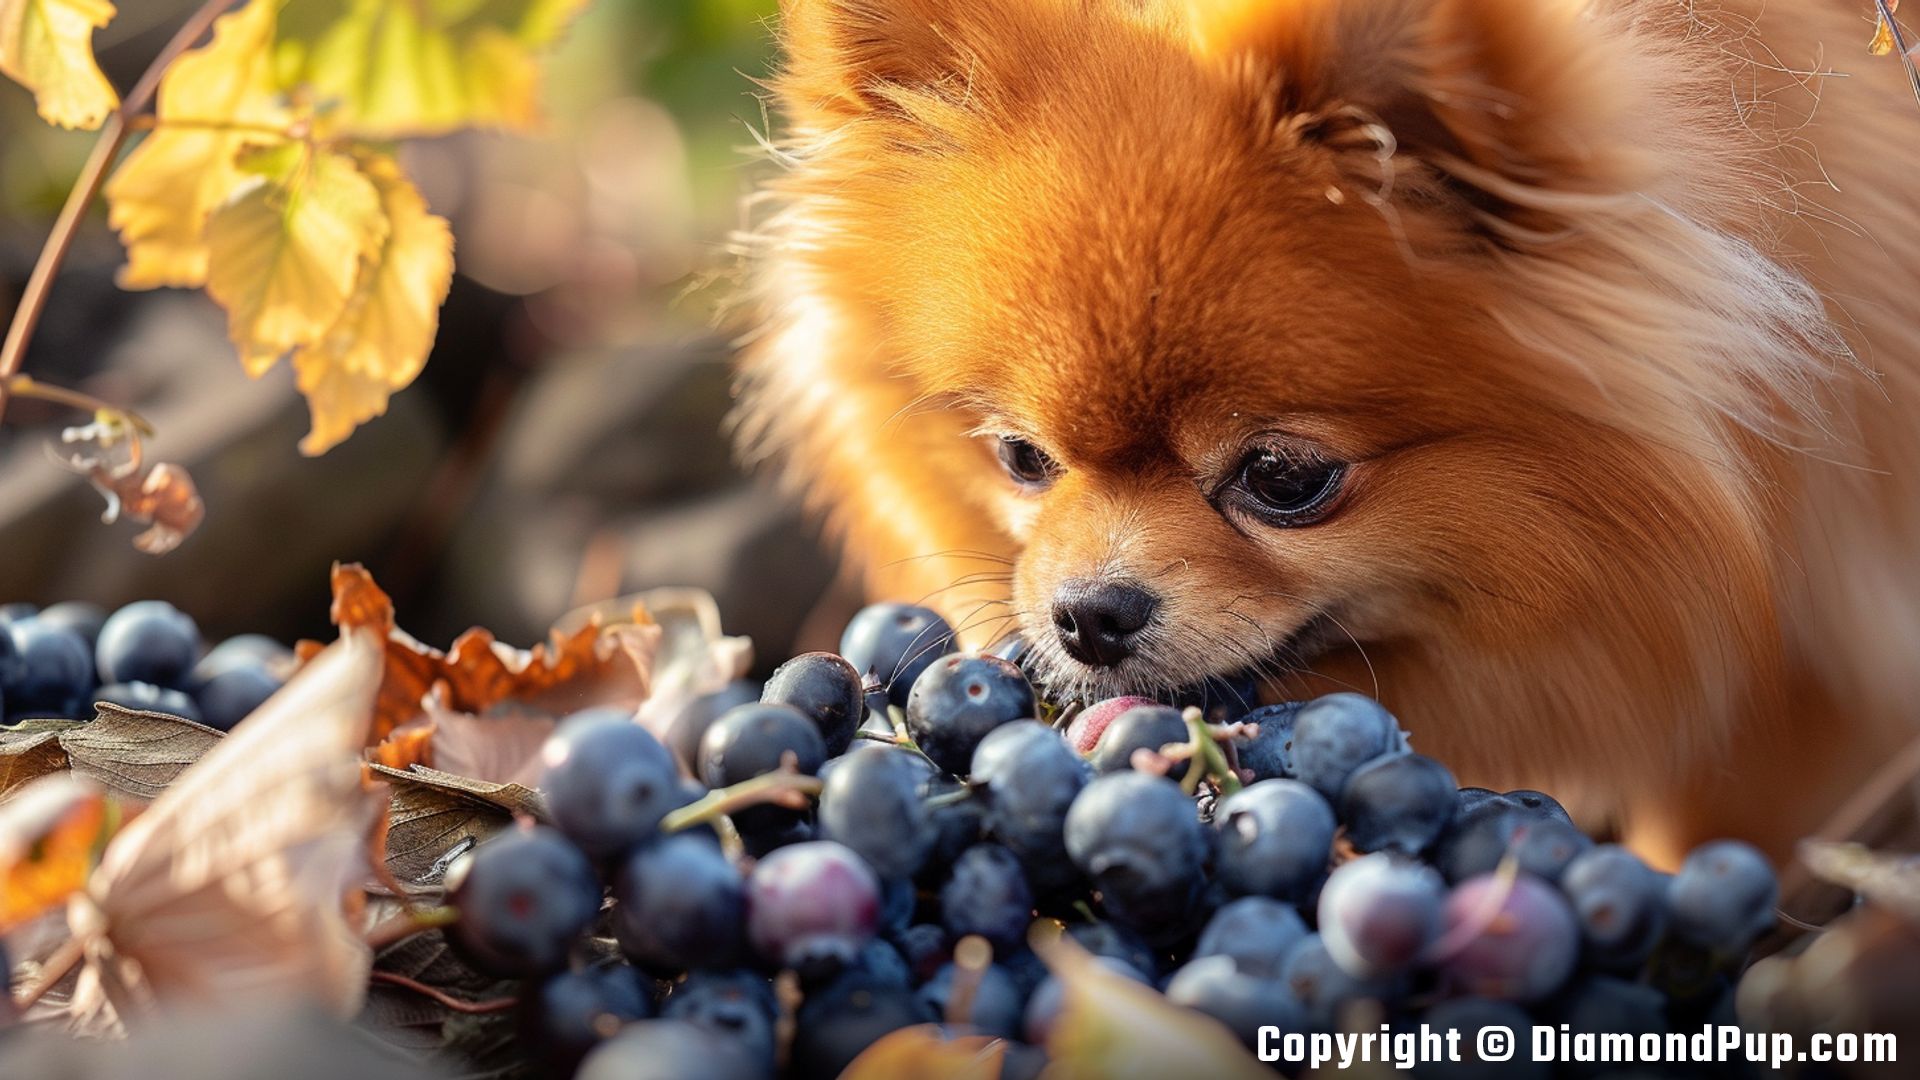 Photograph of a Cute Pomeranian Eating Blueberries